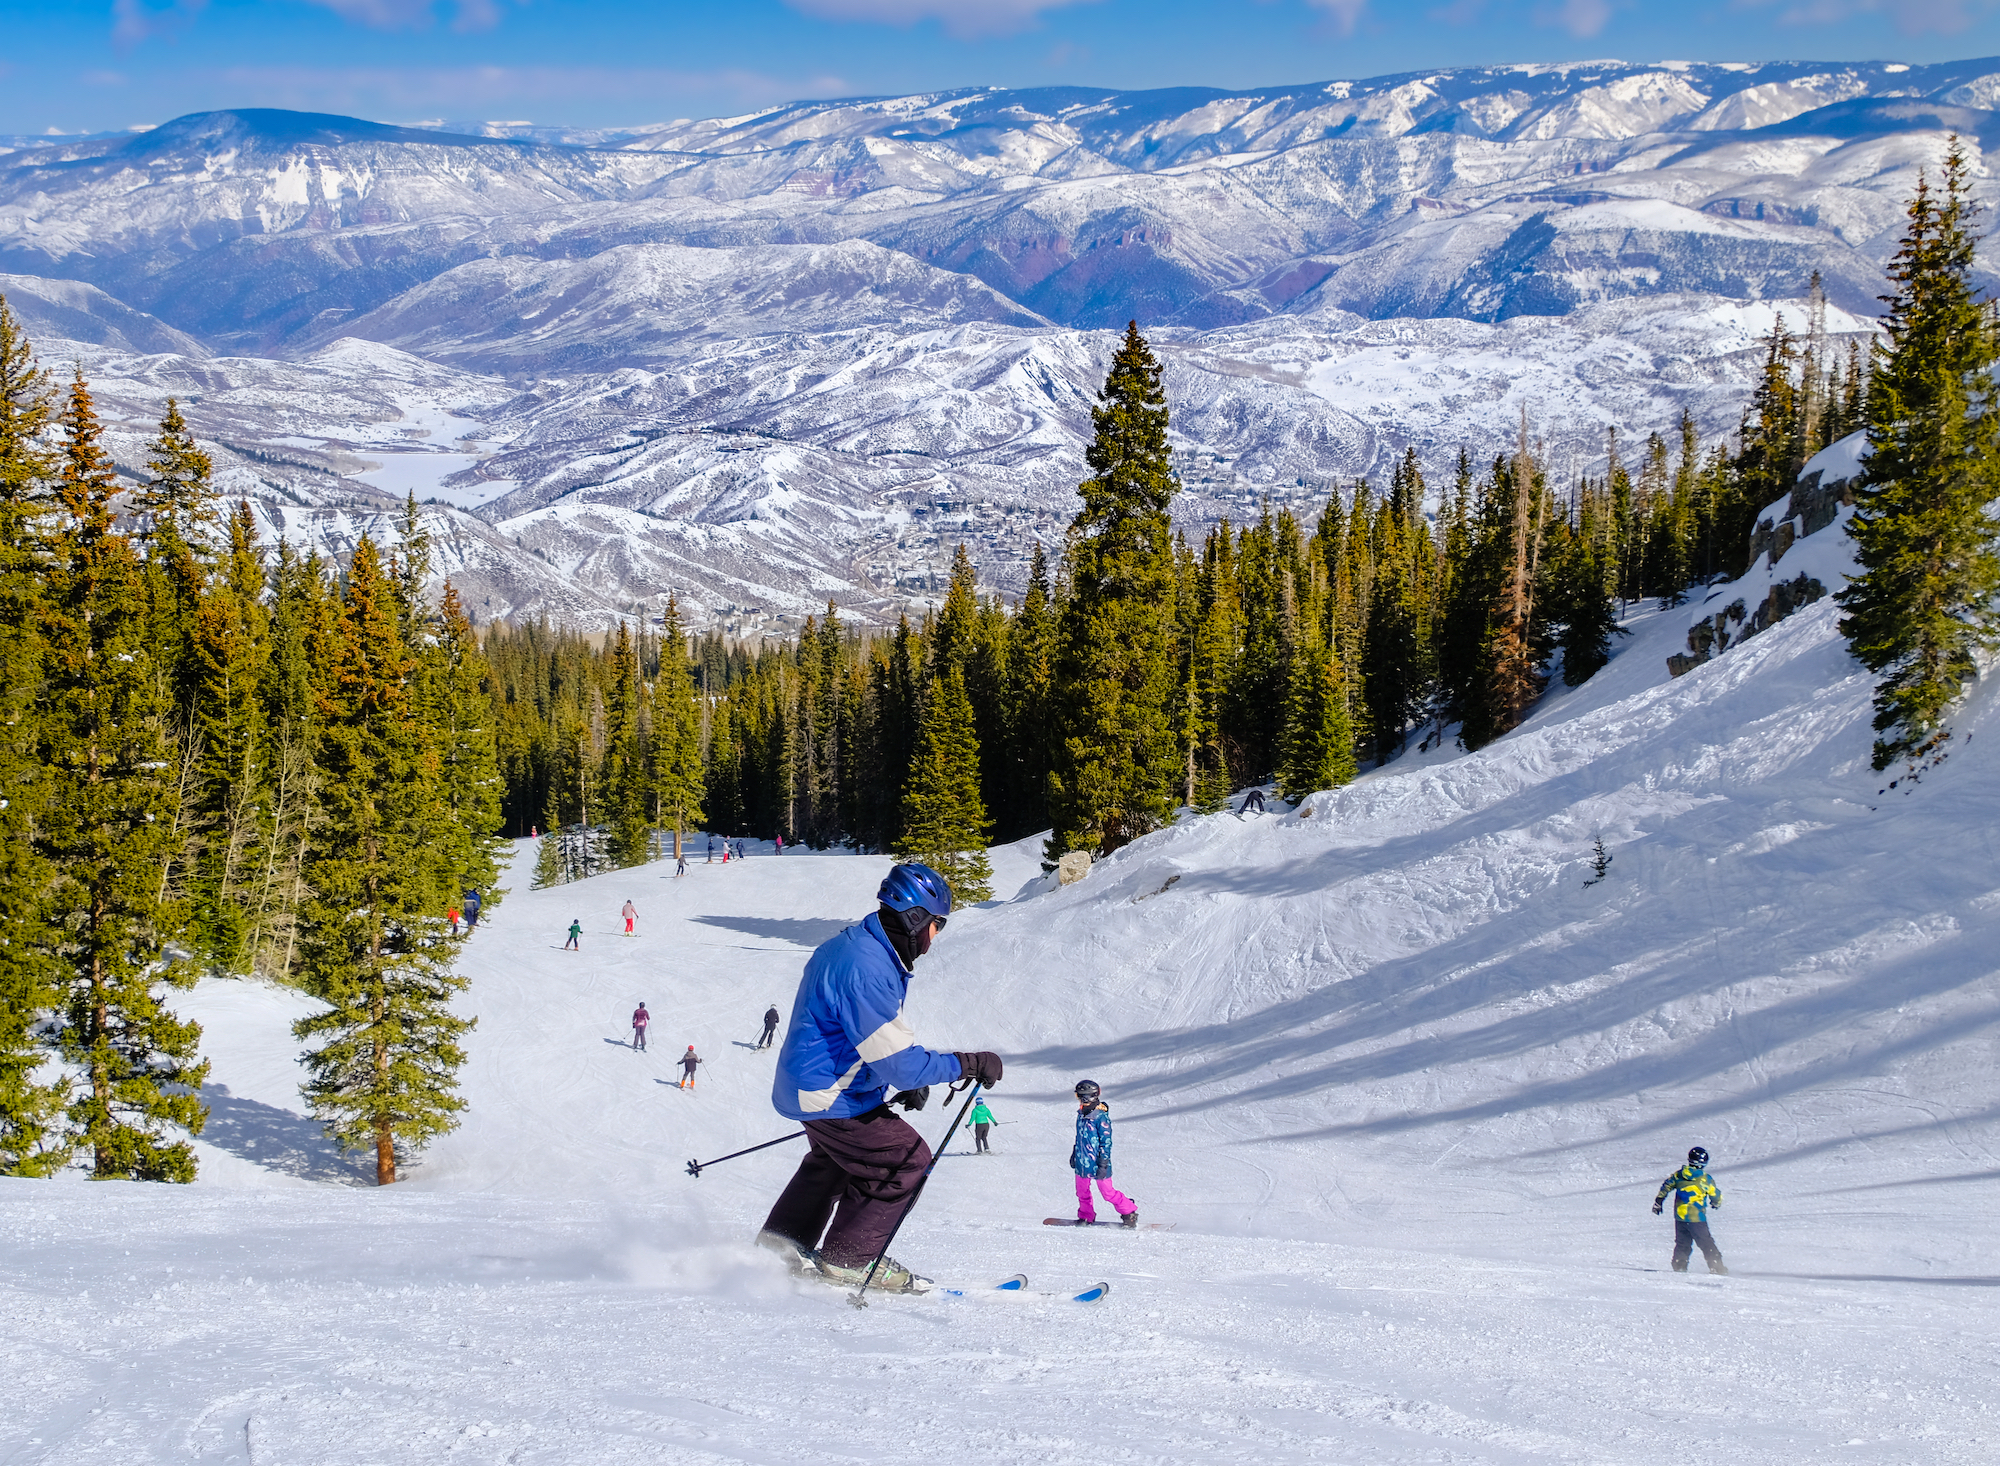 The Most Searched-For Ski Resorts Worldwide: US Resort Claims